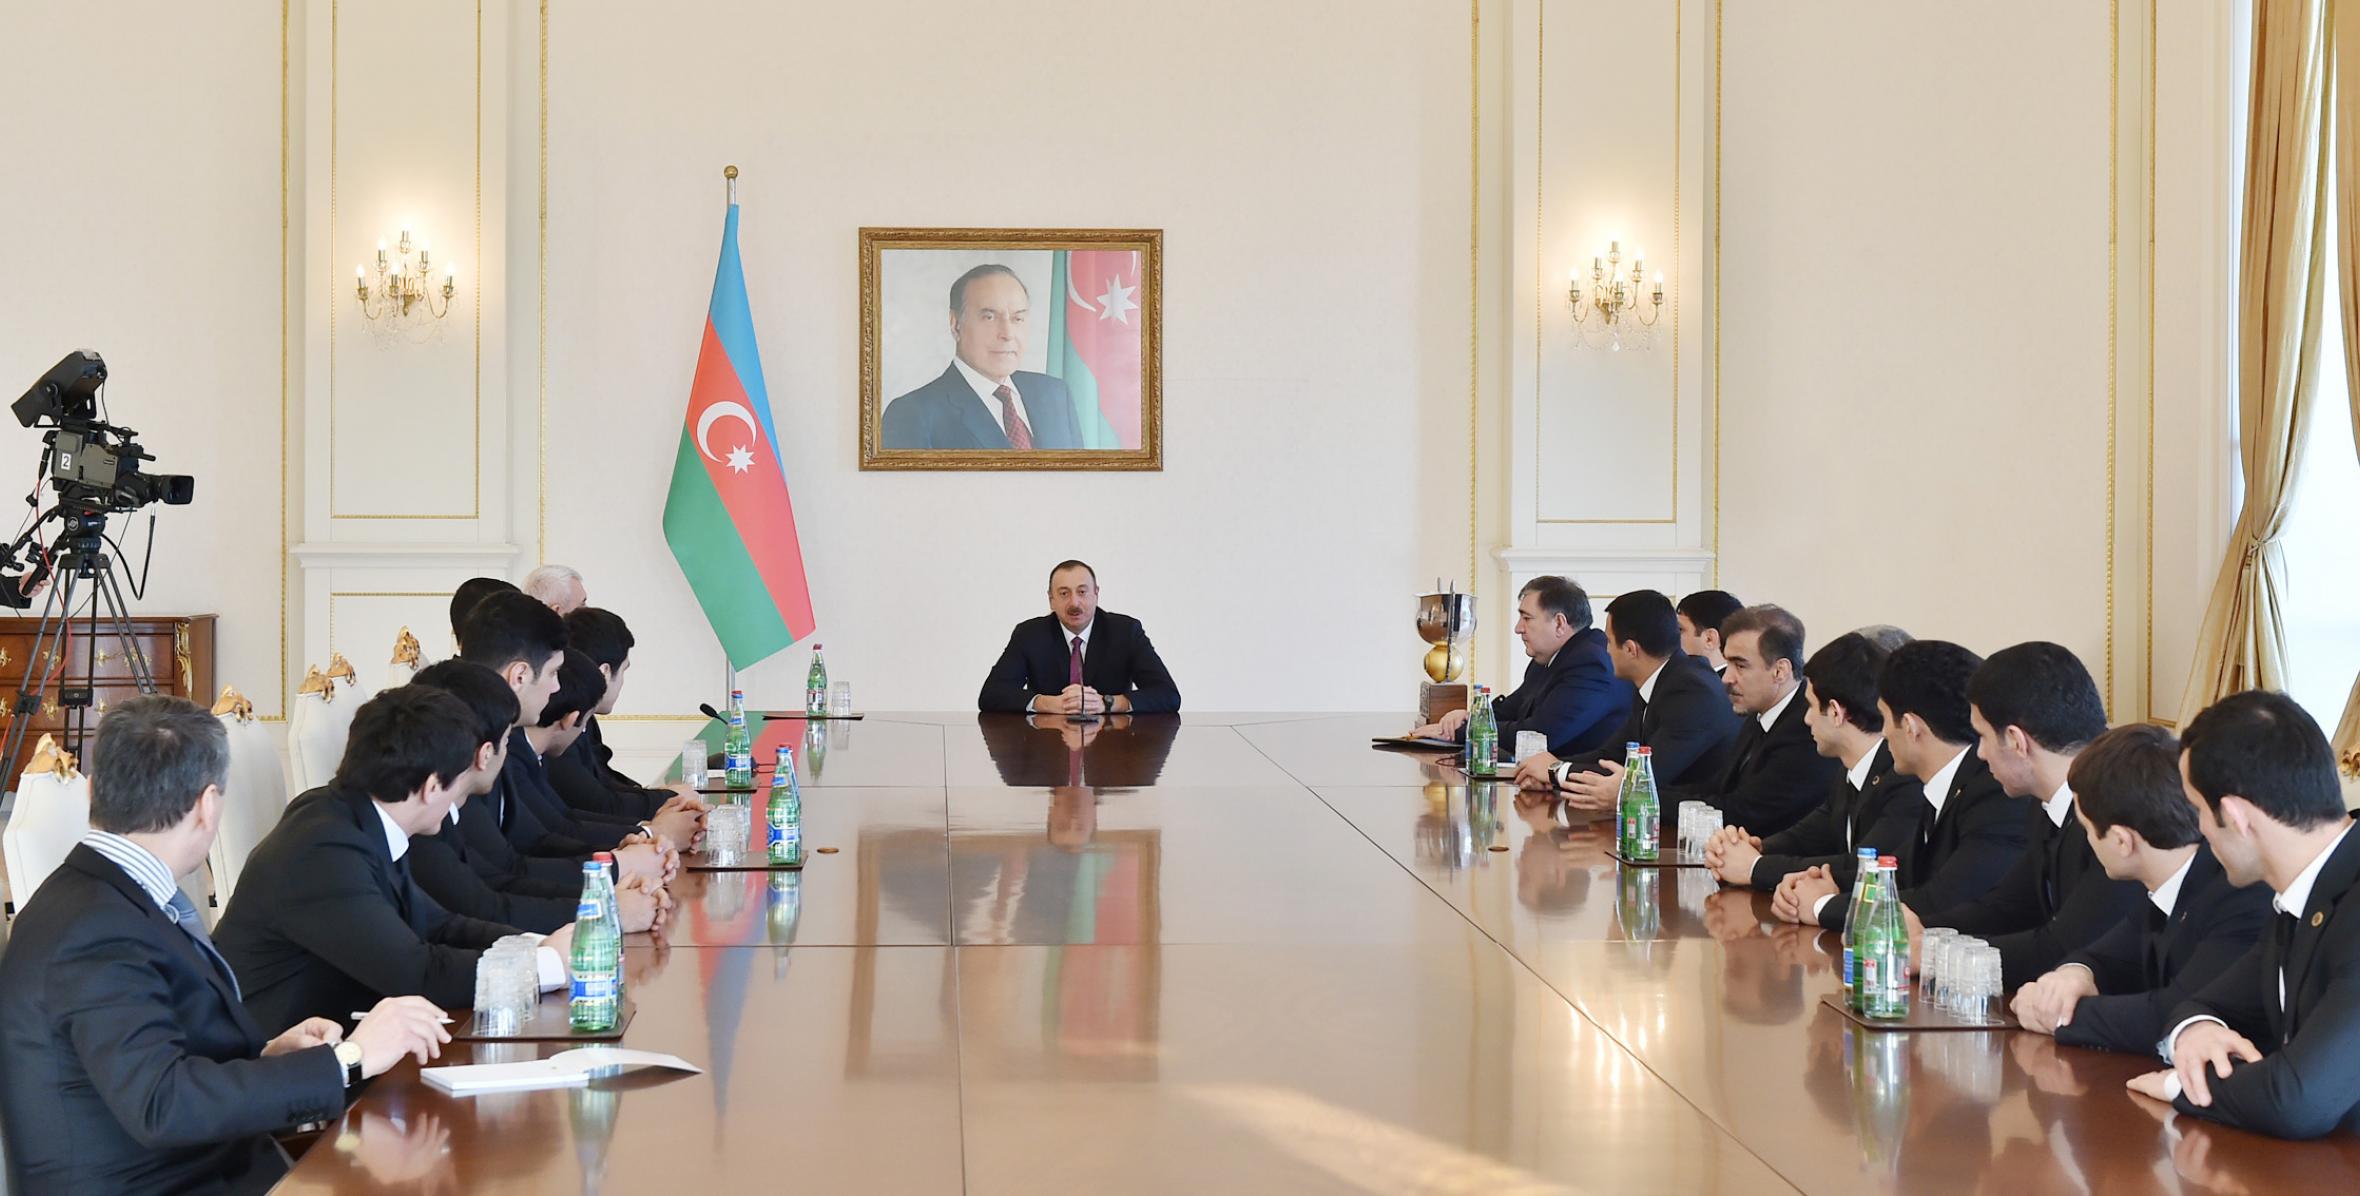 Ilham Aliyev received the members of the national Greco-Roman wrestling team who won the World Cup